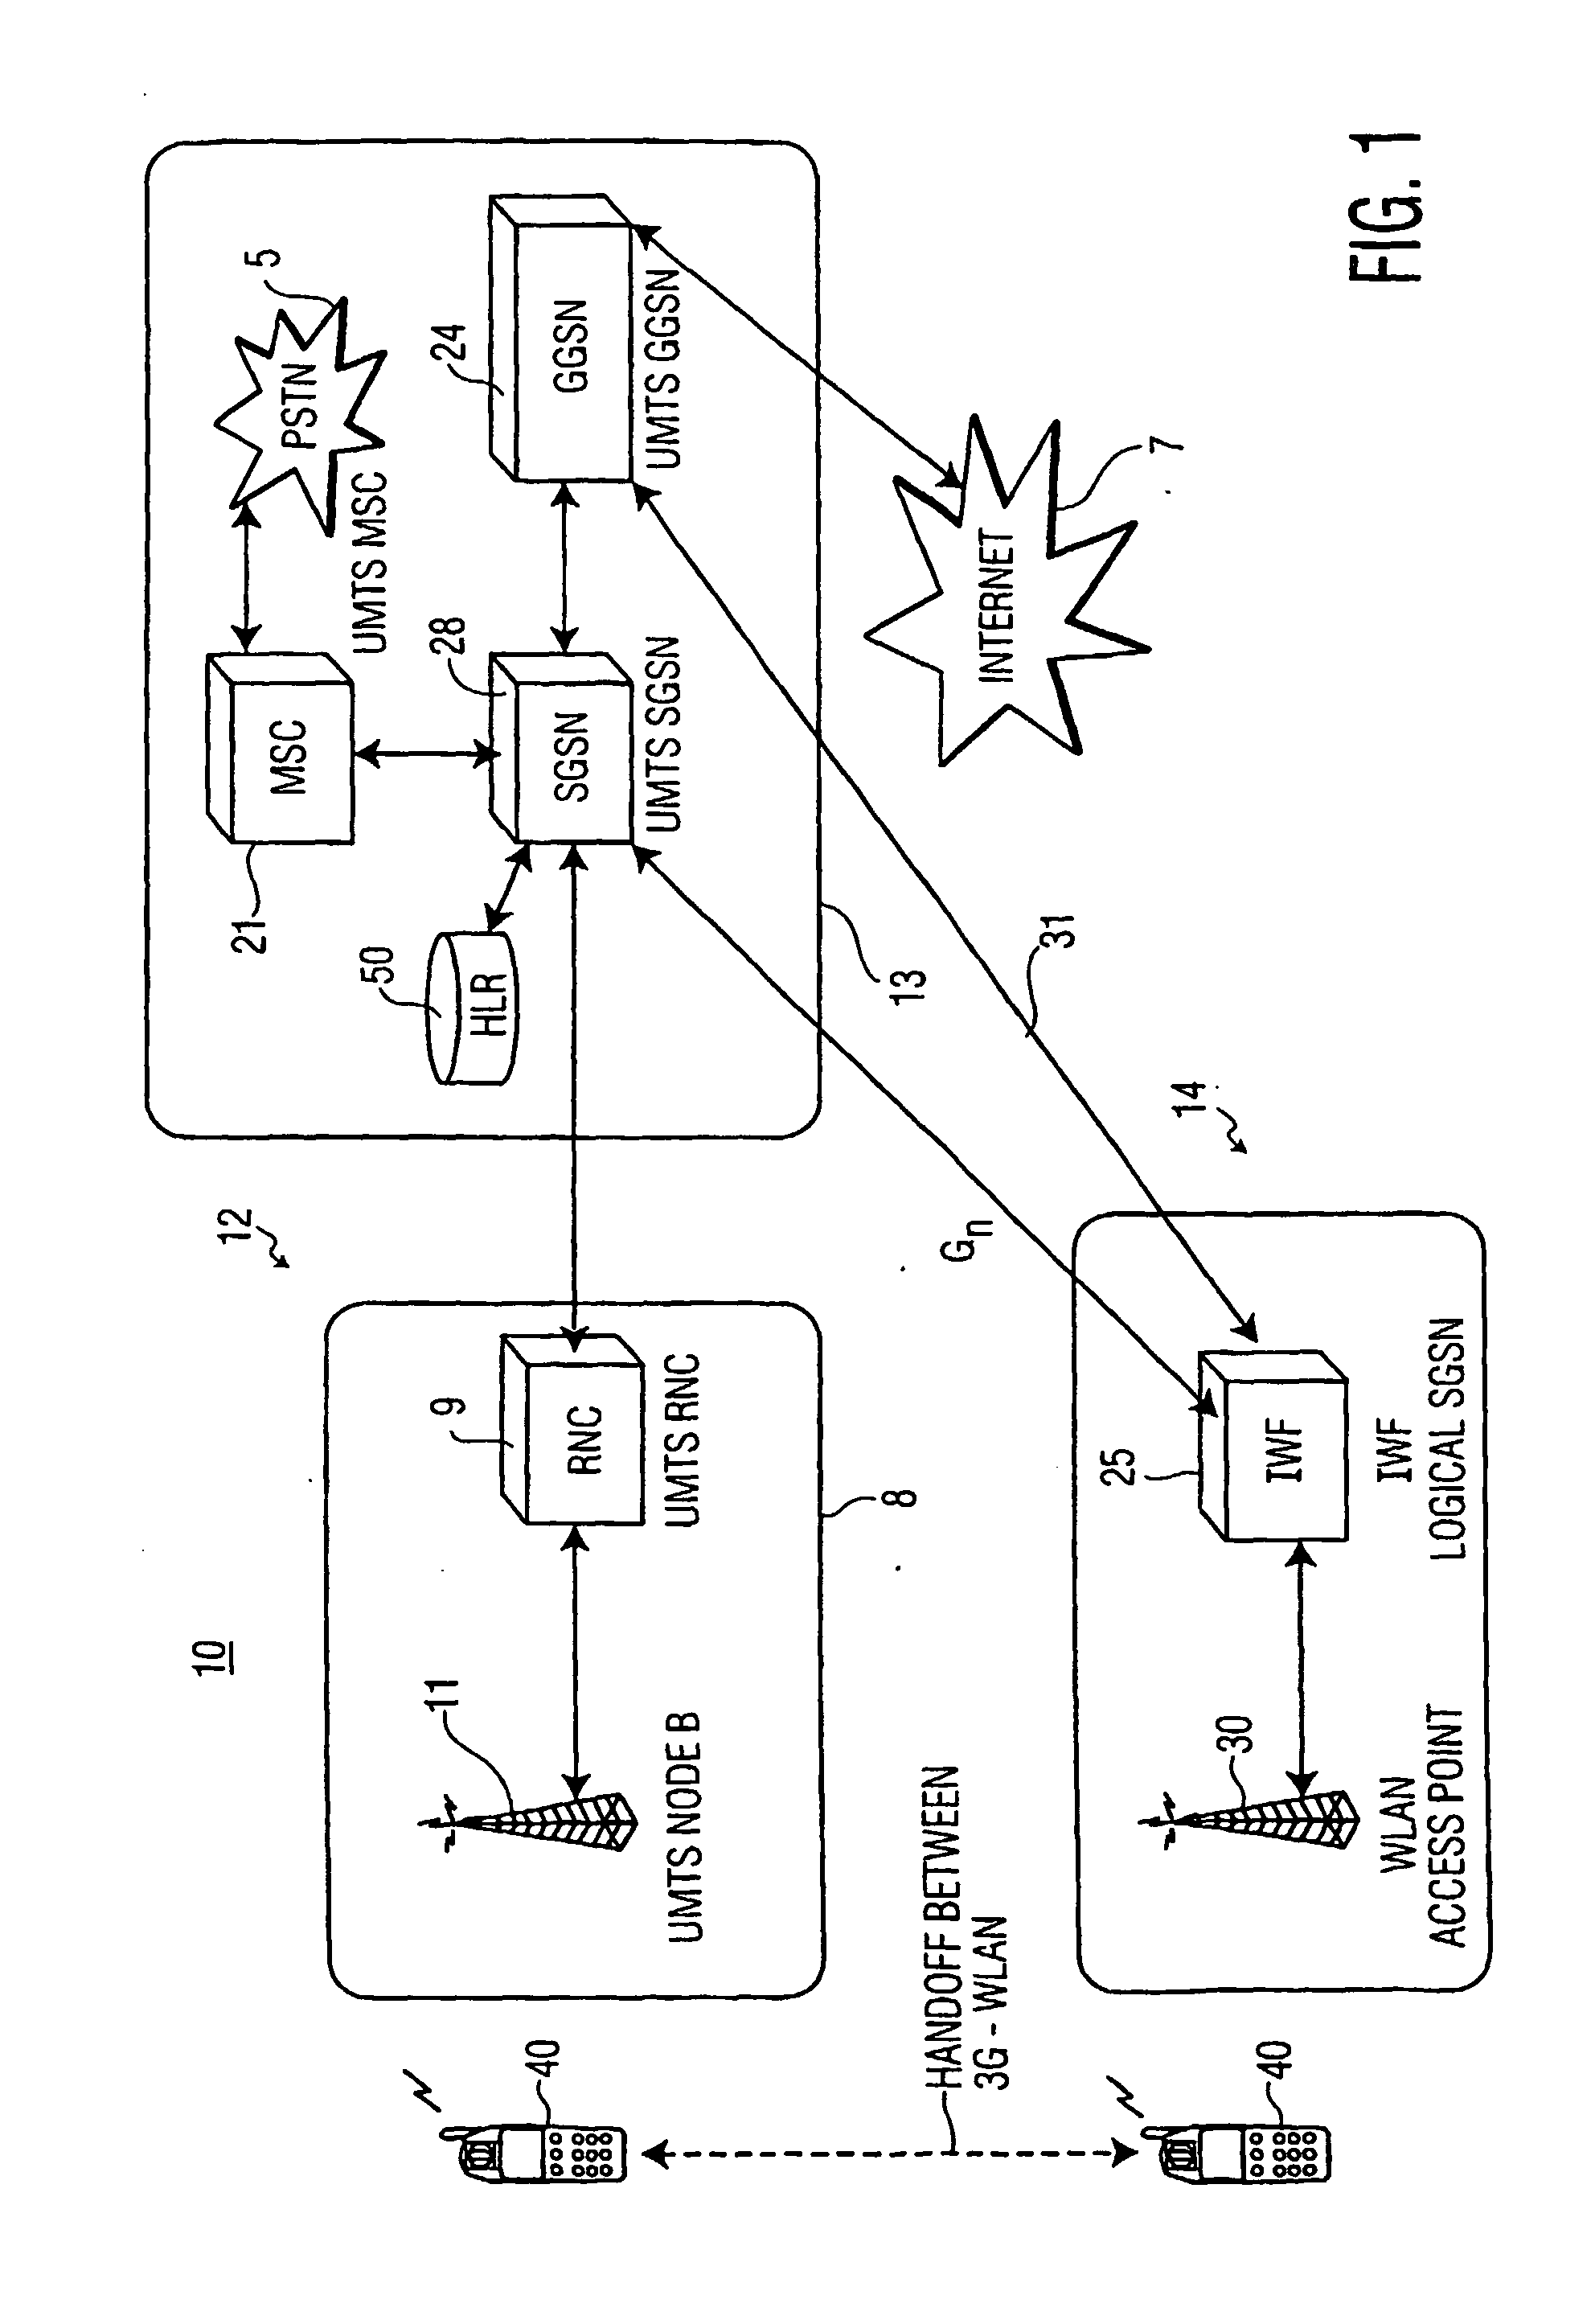 Interfacing a wlan with a mobile communications system